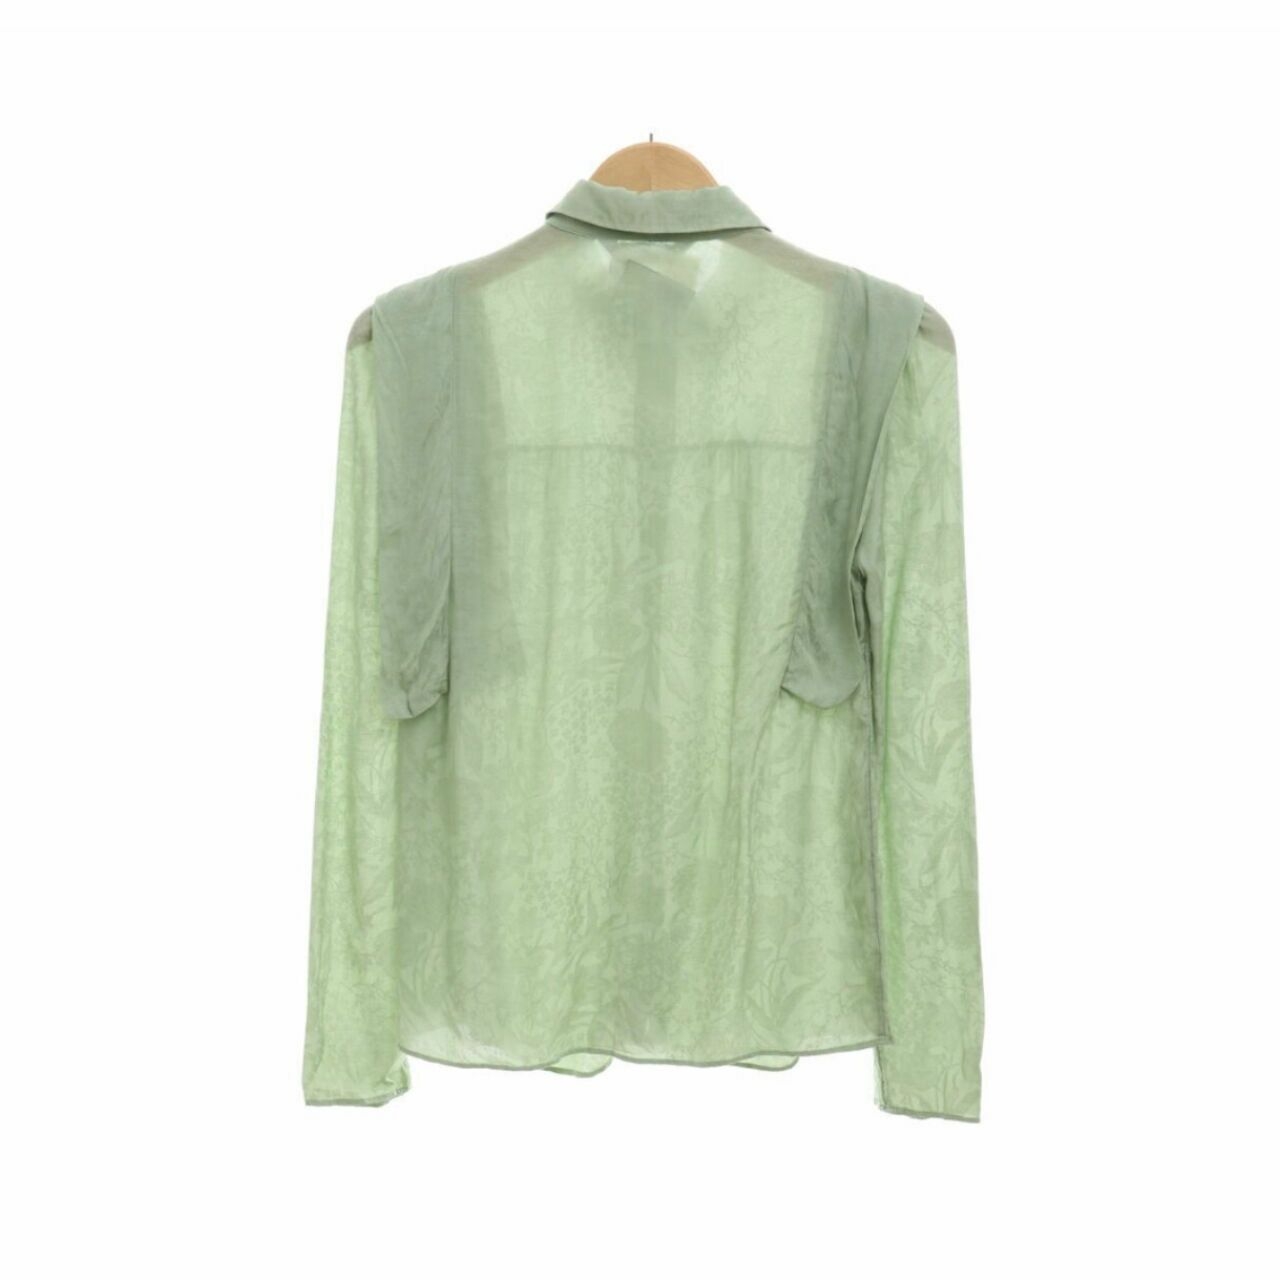 & Other Stories Sage Green Blouse